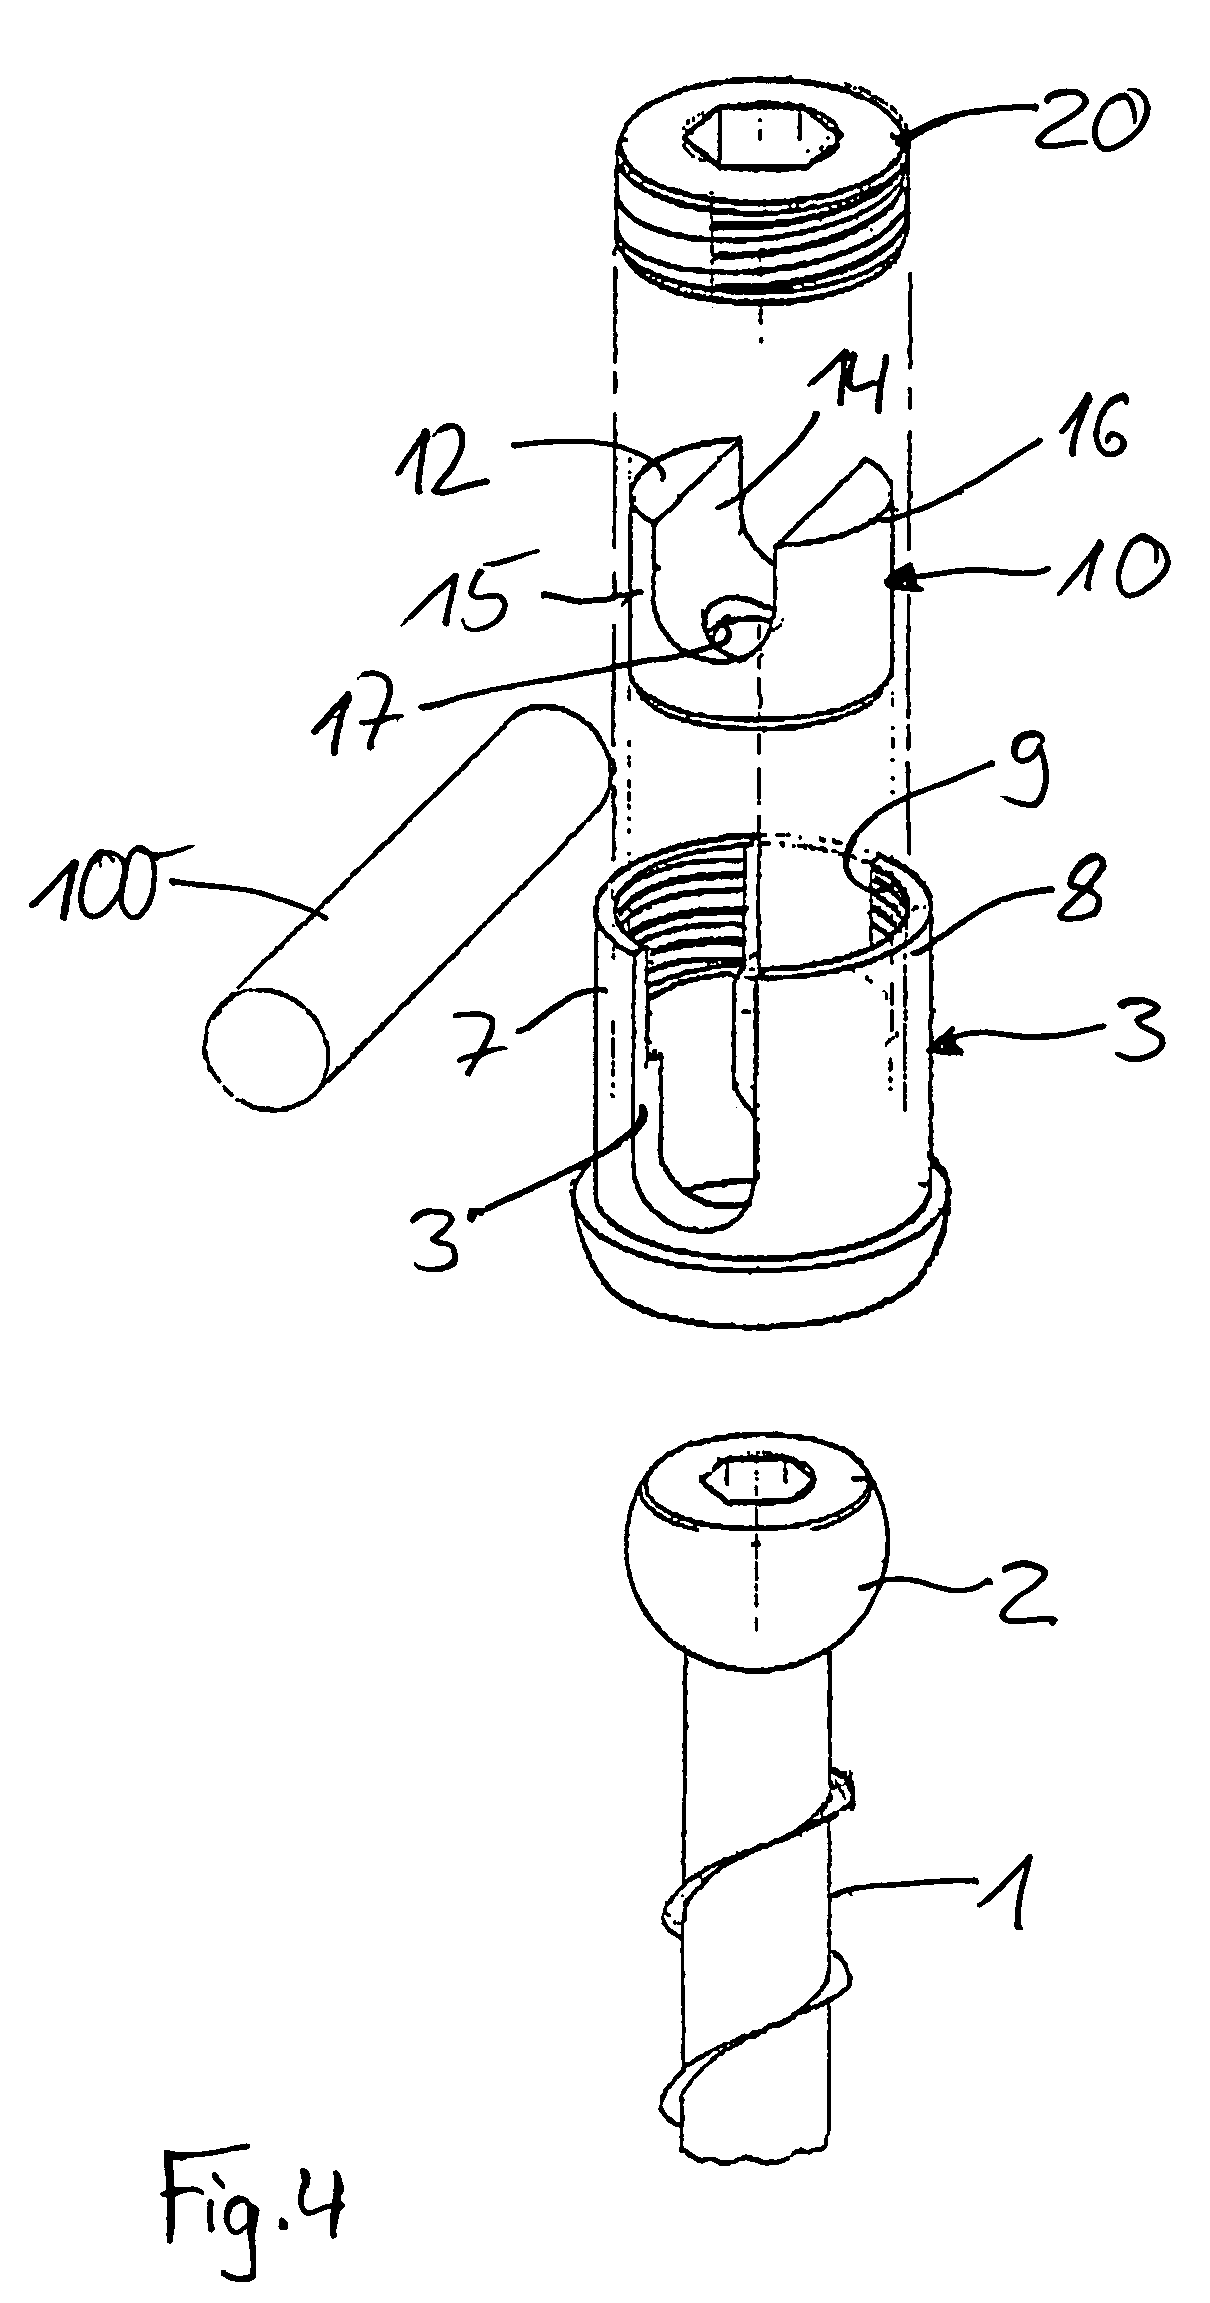 Implant having a shaft and a hold element connected therewith for connecting with a rod